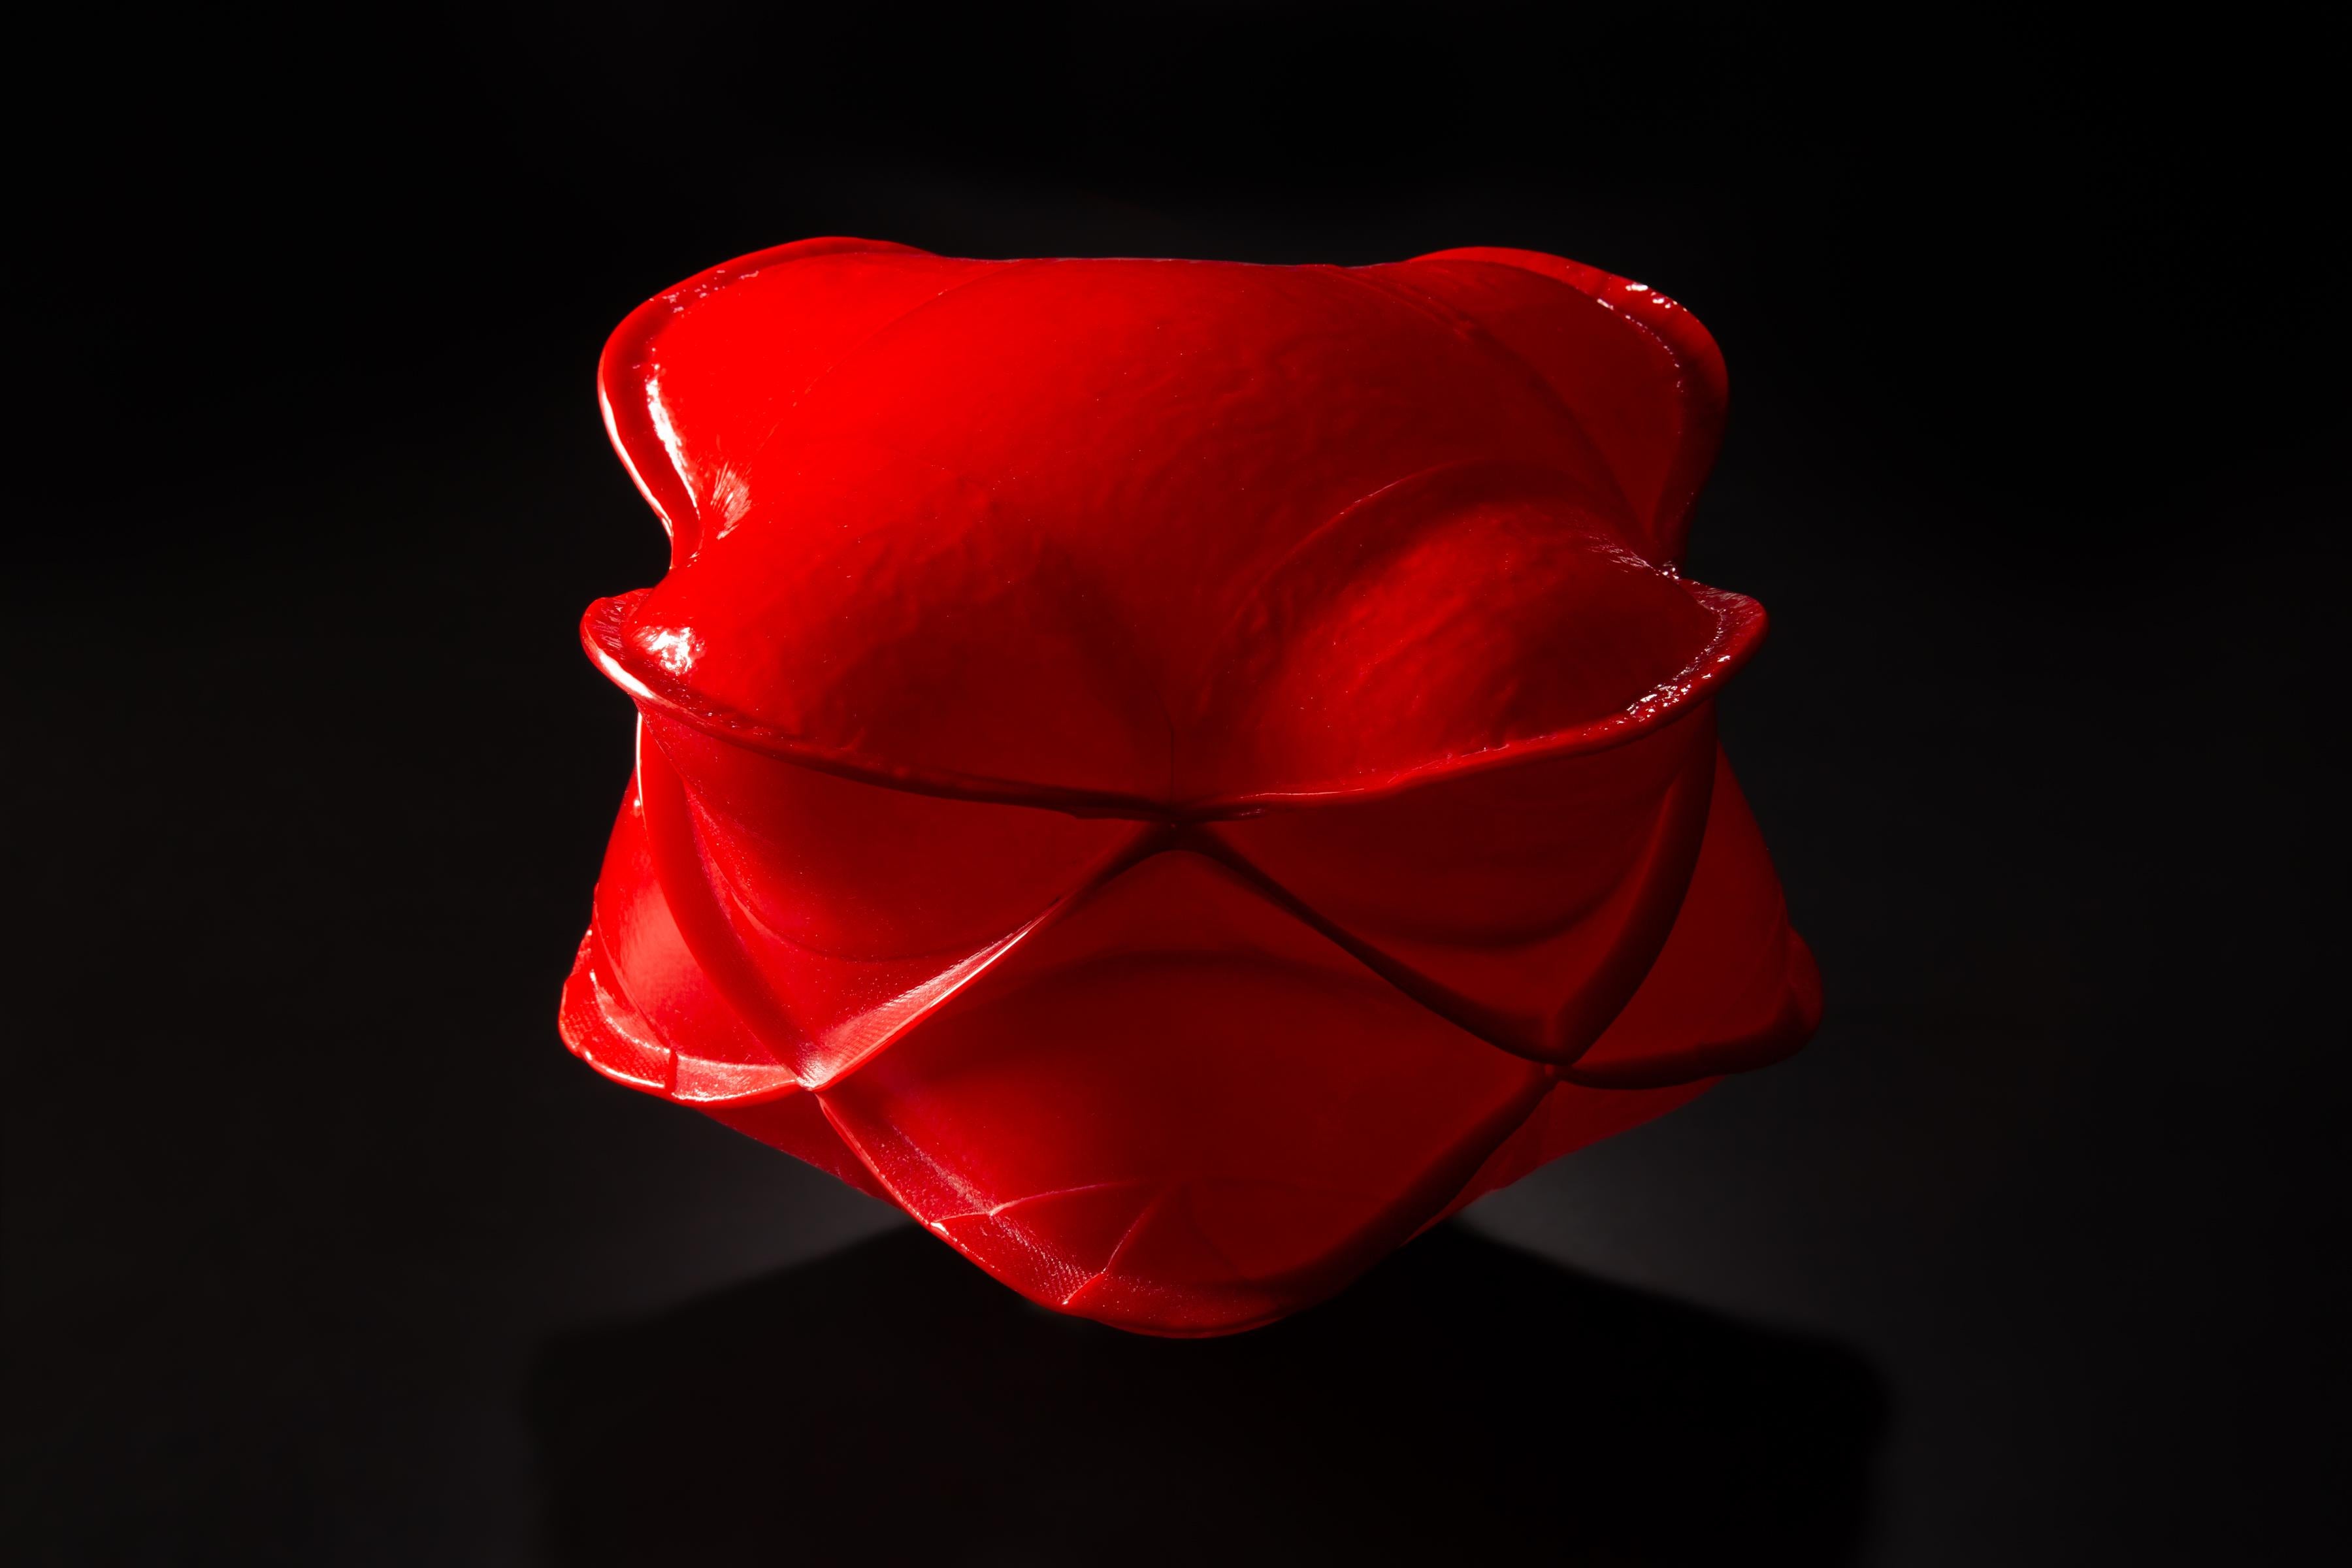 Matthew Szosz Abstract Sculpture - "Inflatable #88", Contemporary, Glass, Sculpture, Fused, Inflated, Abstract